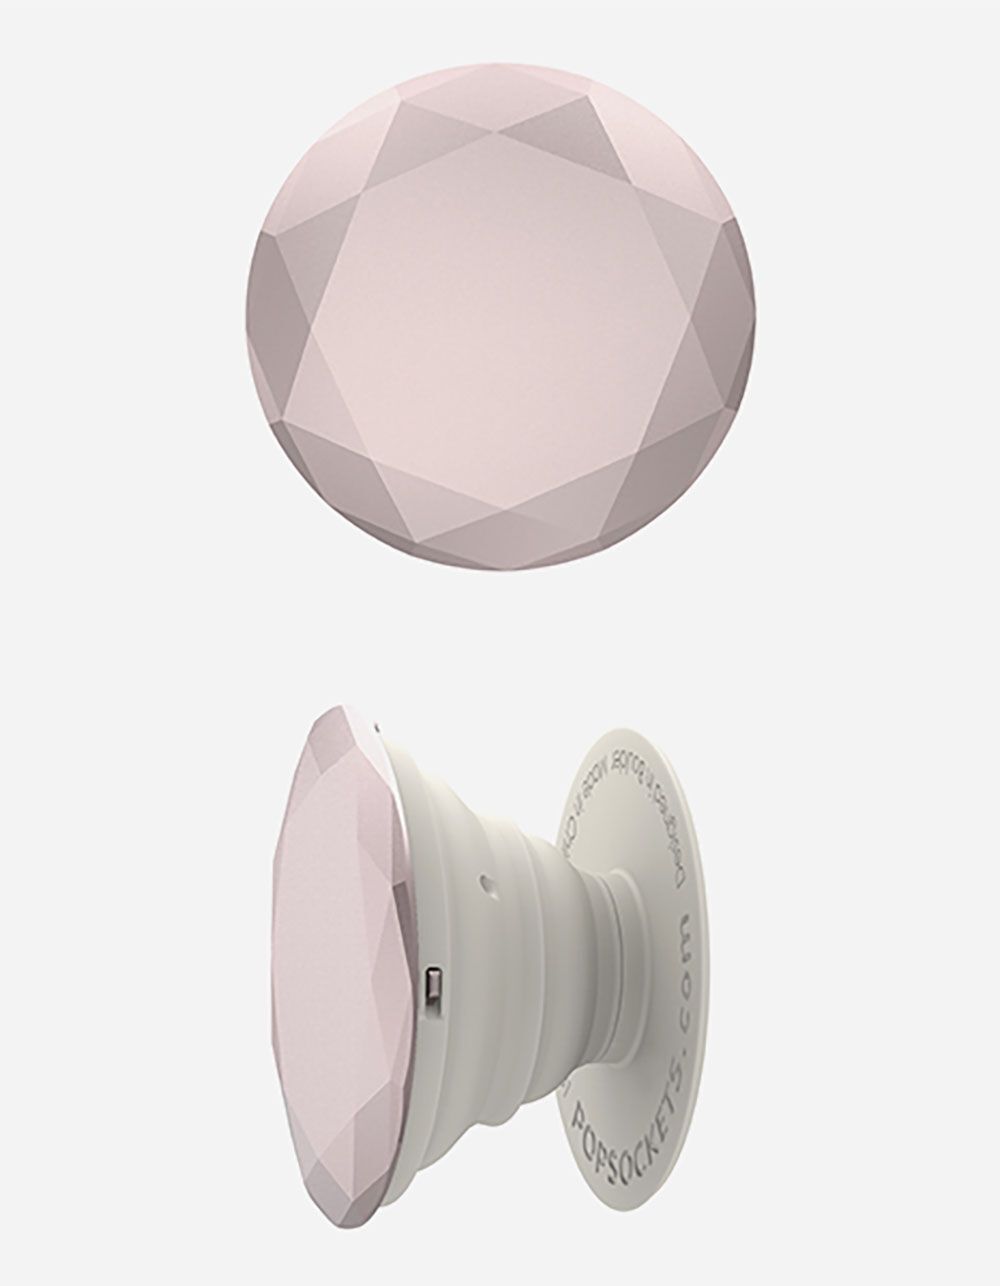 POPSOCKETS ROSE DIAMOND PHONE STAND AND GRIP | Tillys